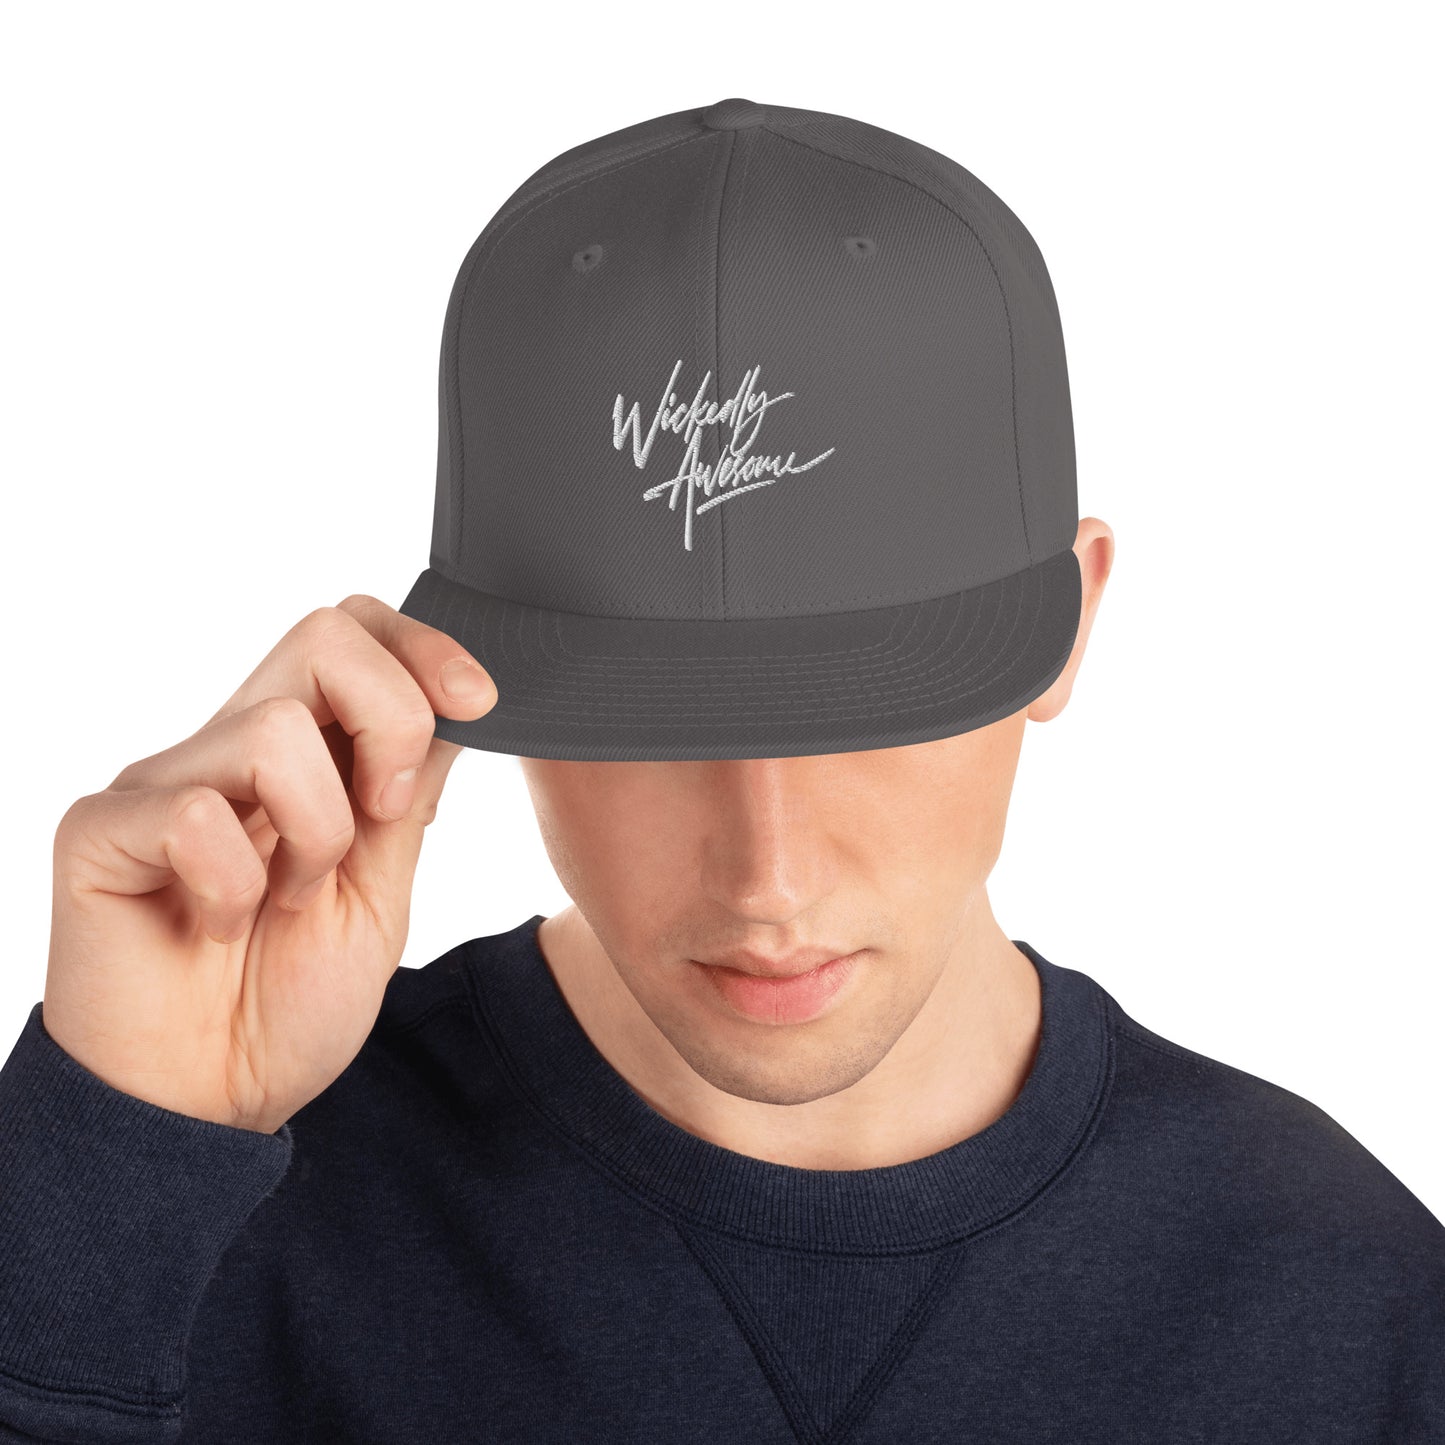 Wickedly Awesome Snapback Hat